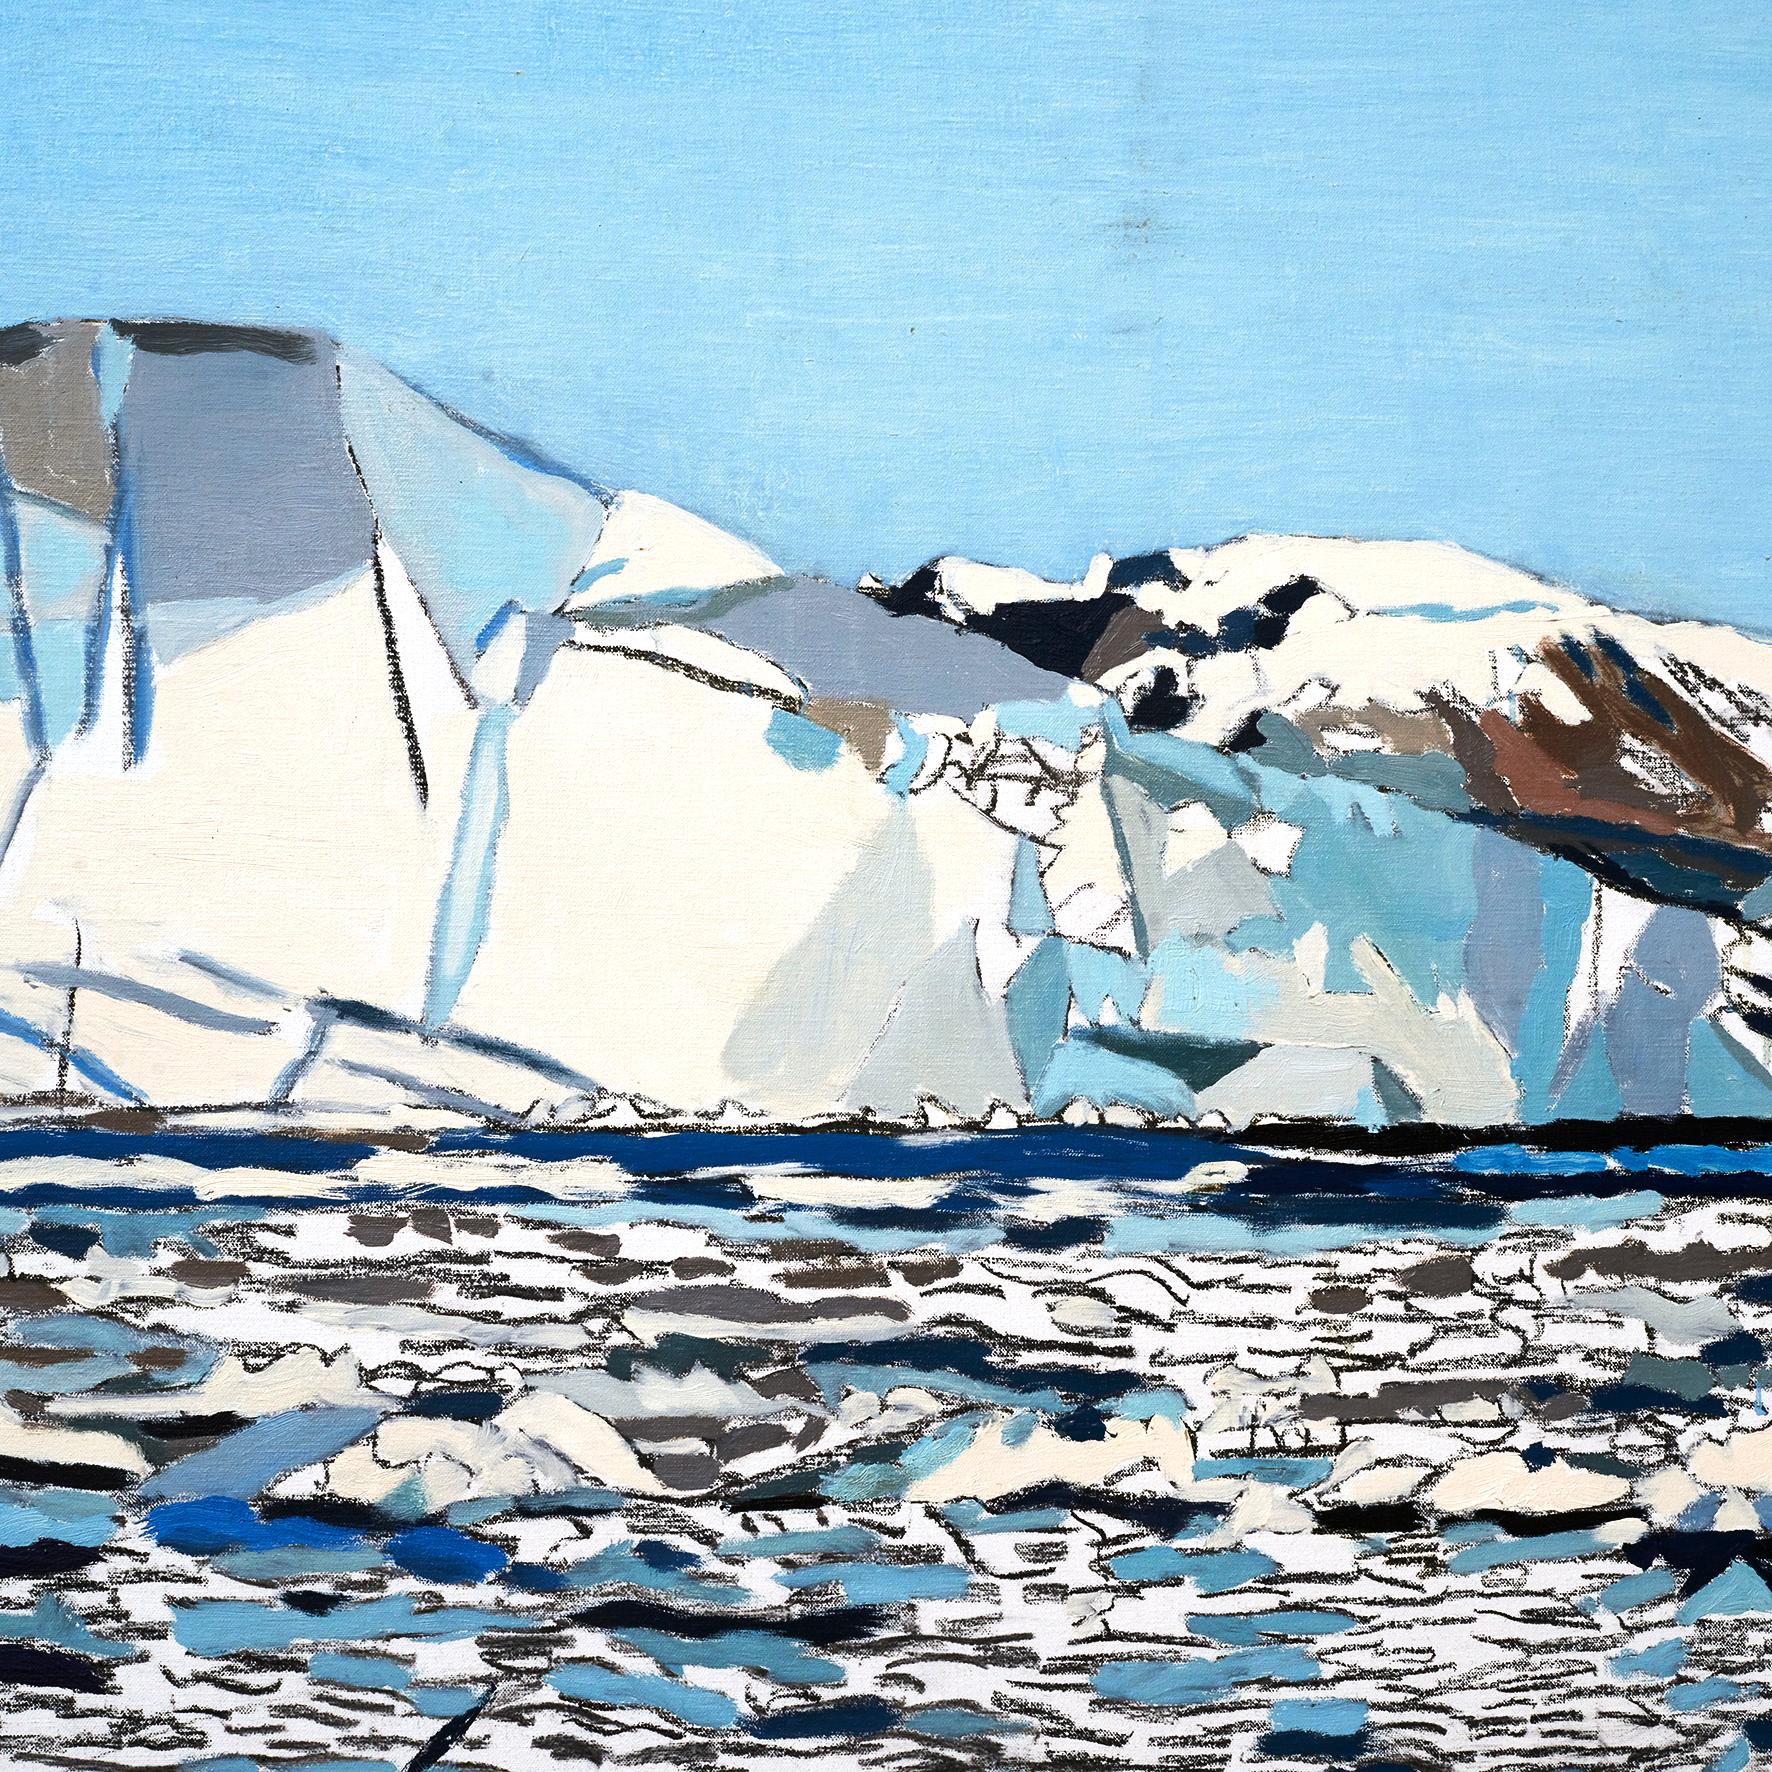 The painting depicts the Greenland ice sheet with several icebergs. 
One of Eva's last big project was to paint motifs from the arctic.

This painting is from her estate and therefore not completely finished, but a very exciting